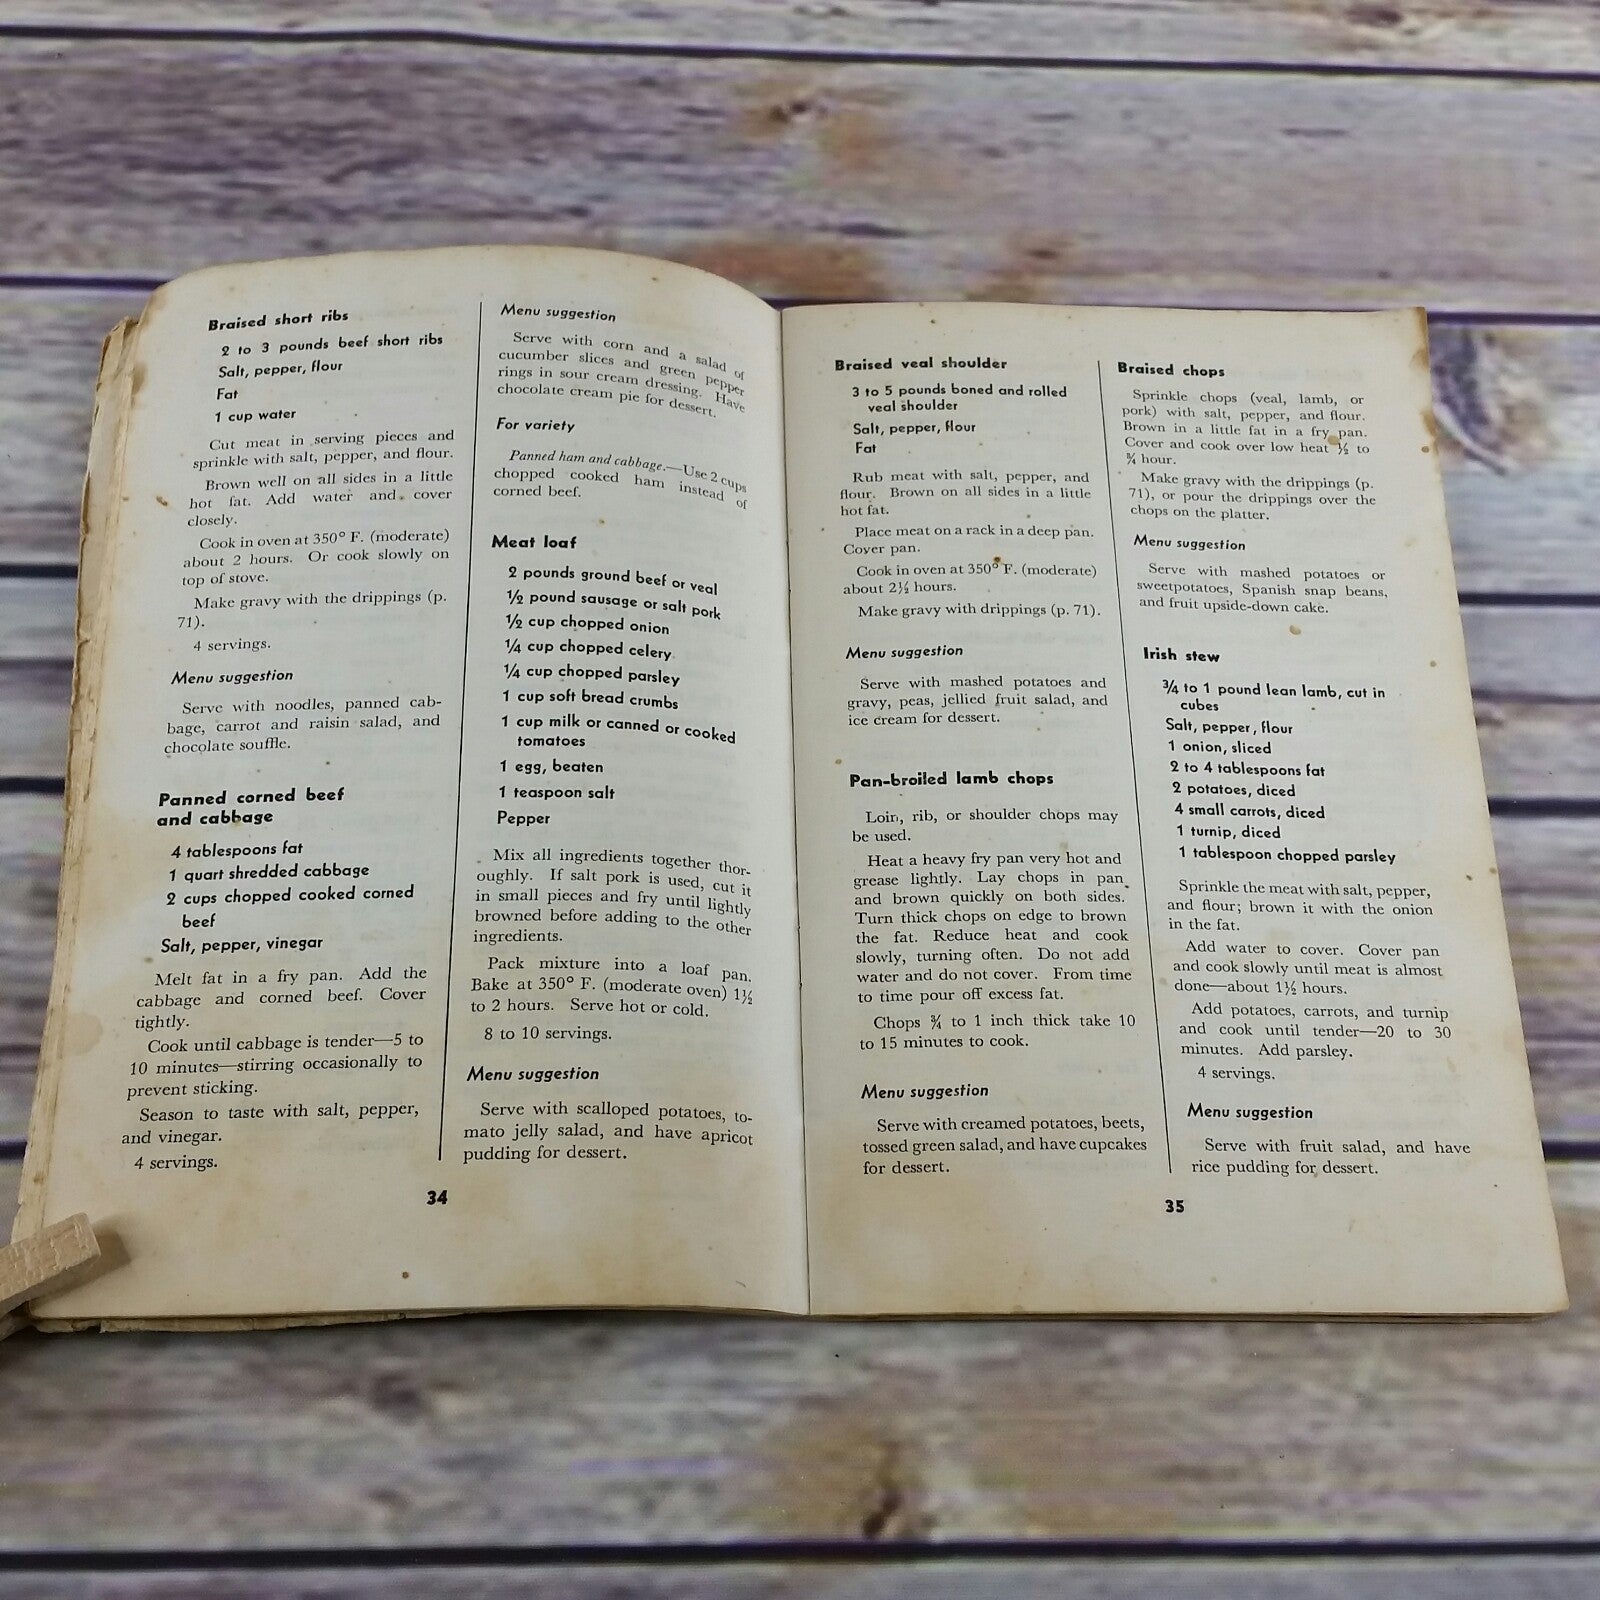 Vintage Cookbook Family Fare Food Management and Recipes Department of Agriculture 1950s - At Grandma's Table